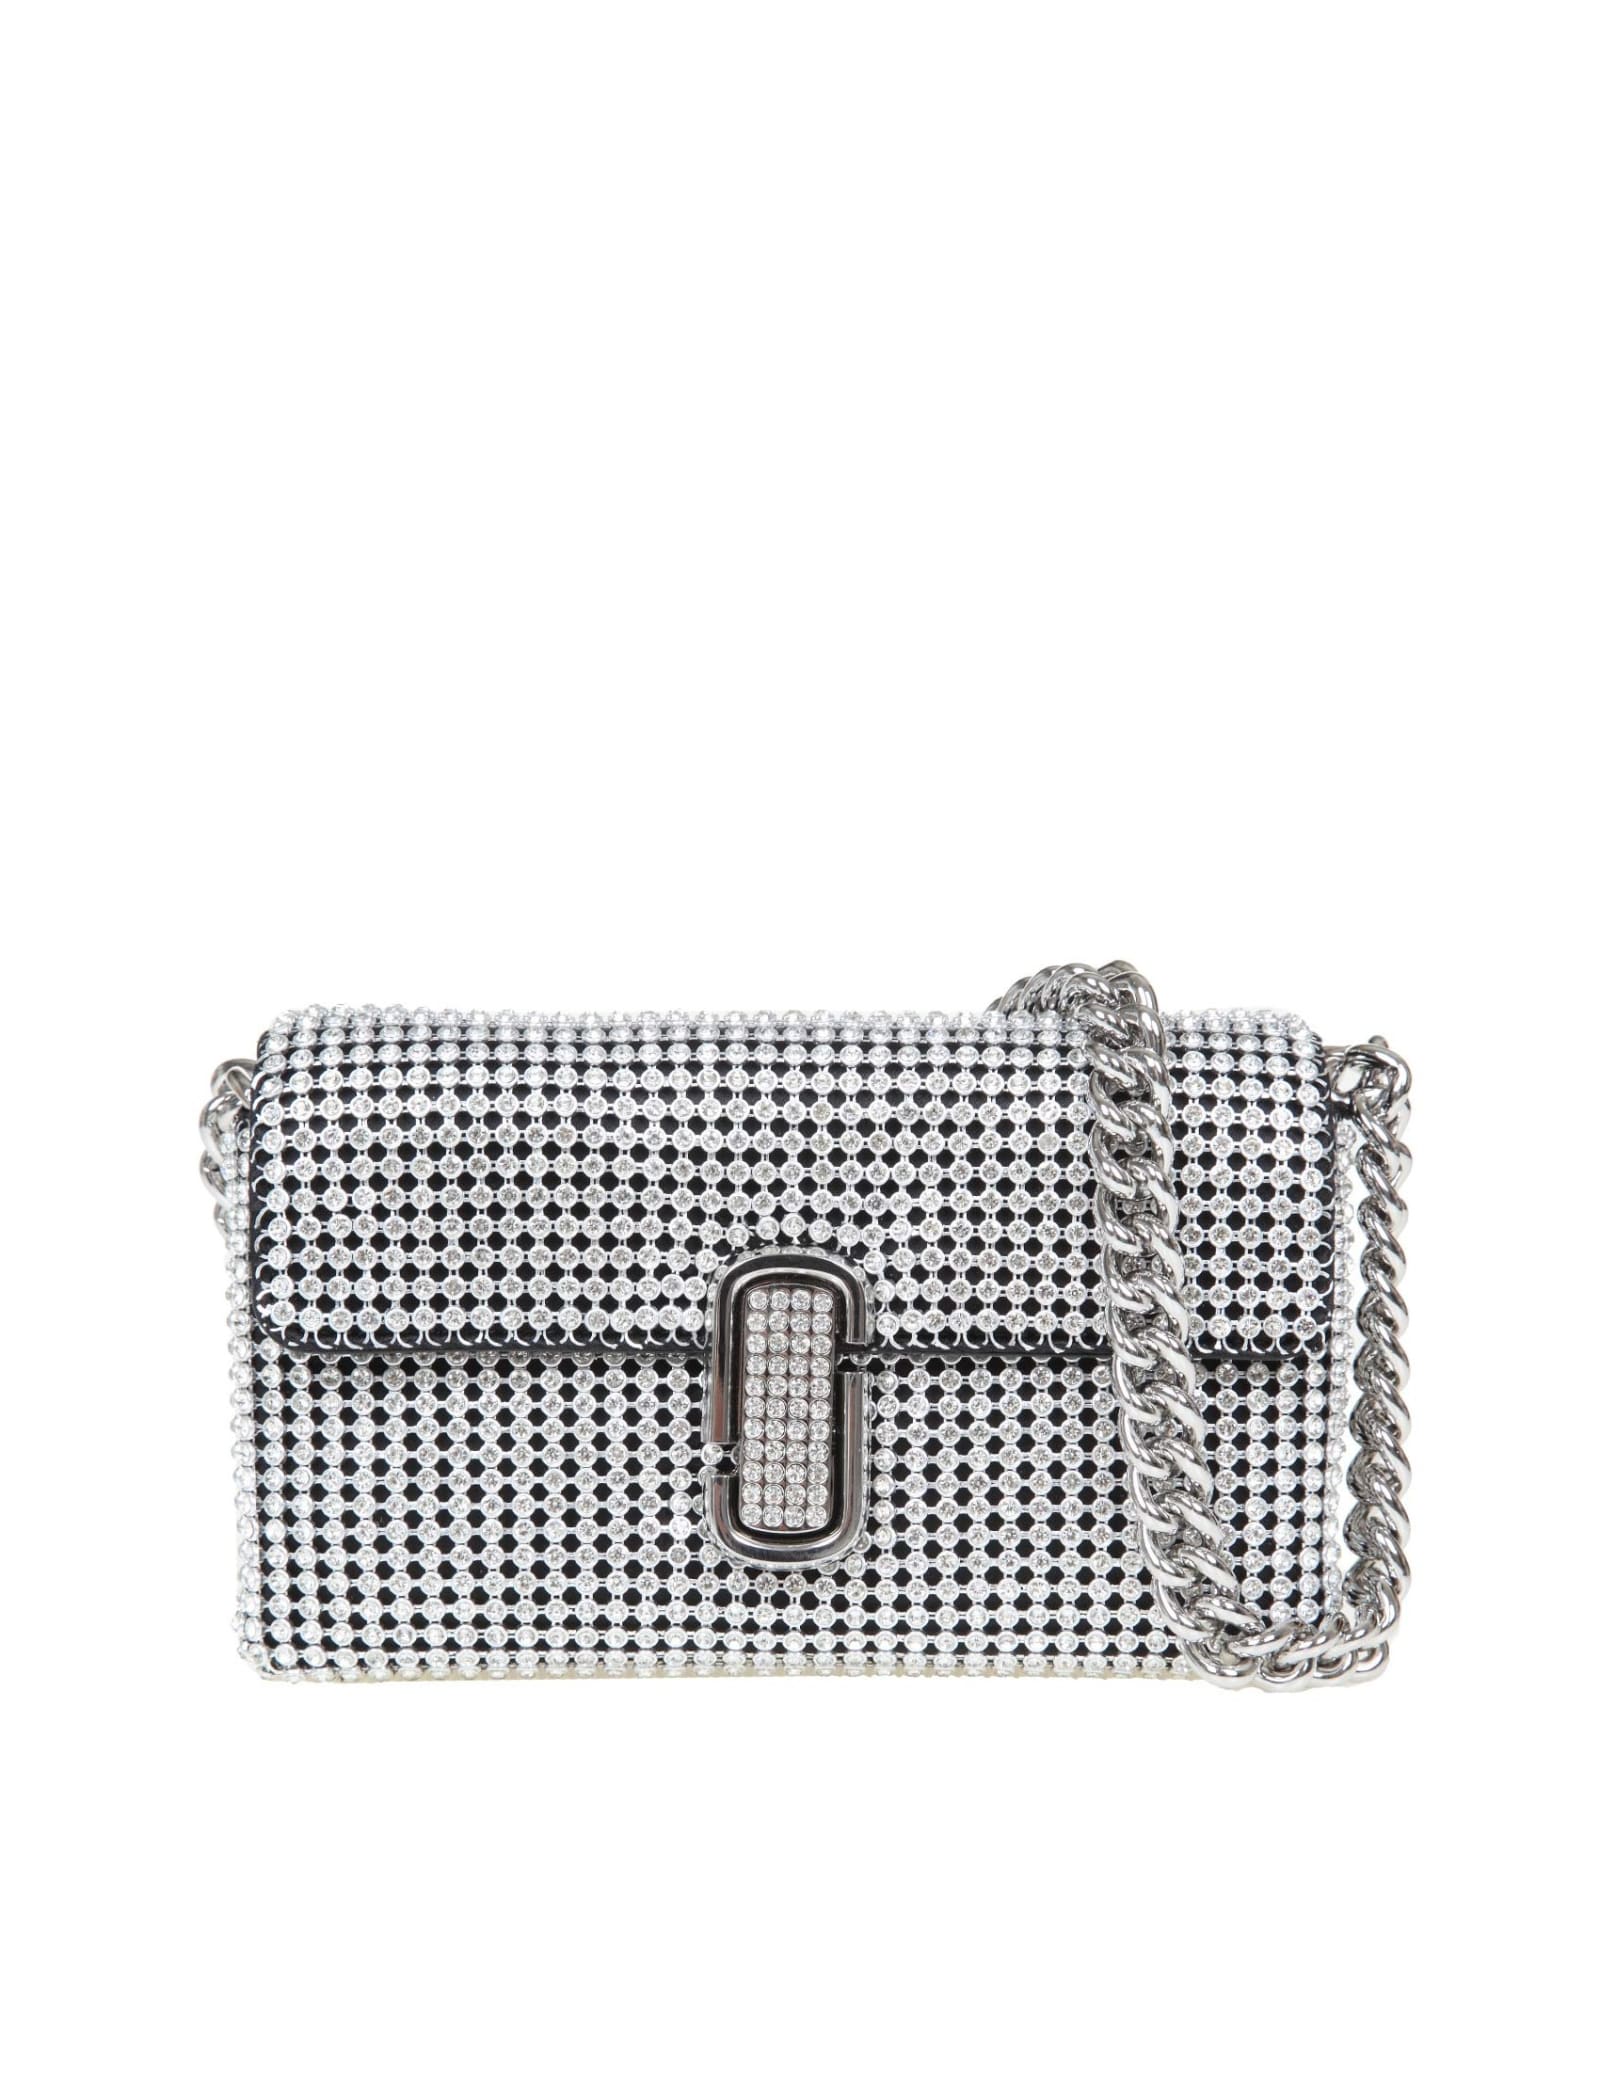 MARC JACOBS MINI SOFT BAG IN FABRIC WITH APPLIED RHINESTONES